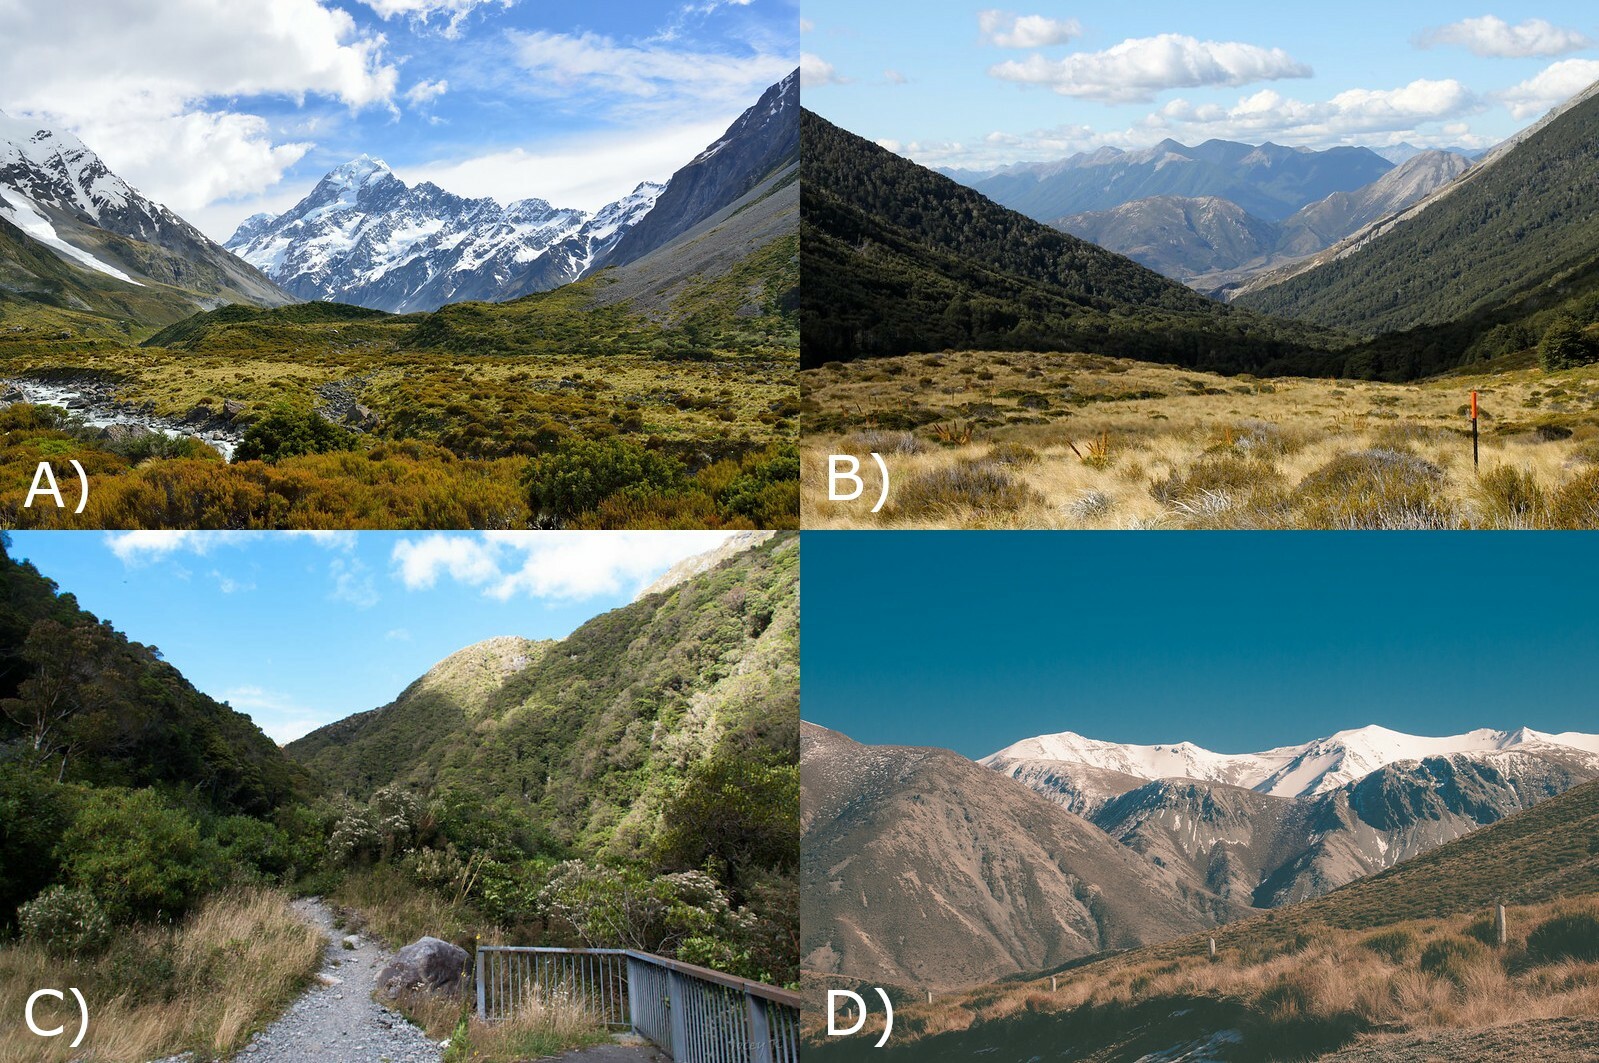 Examples of habitat from the four field collection sites sampled by Primack. A) Aoraki/Mount Cook, Tristan Schmurr CC BY 2.0; B) Cass, Eli Duke CC BY-SA 2.0; C) Otira Gorge, Jocelyn Kinghorn CC BY-SA 2.0; D) Craigieburn, Mark Hamilton CC BY-SA 2.0. Source for all images: Flickr